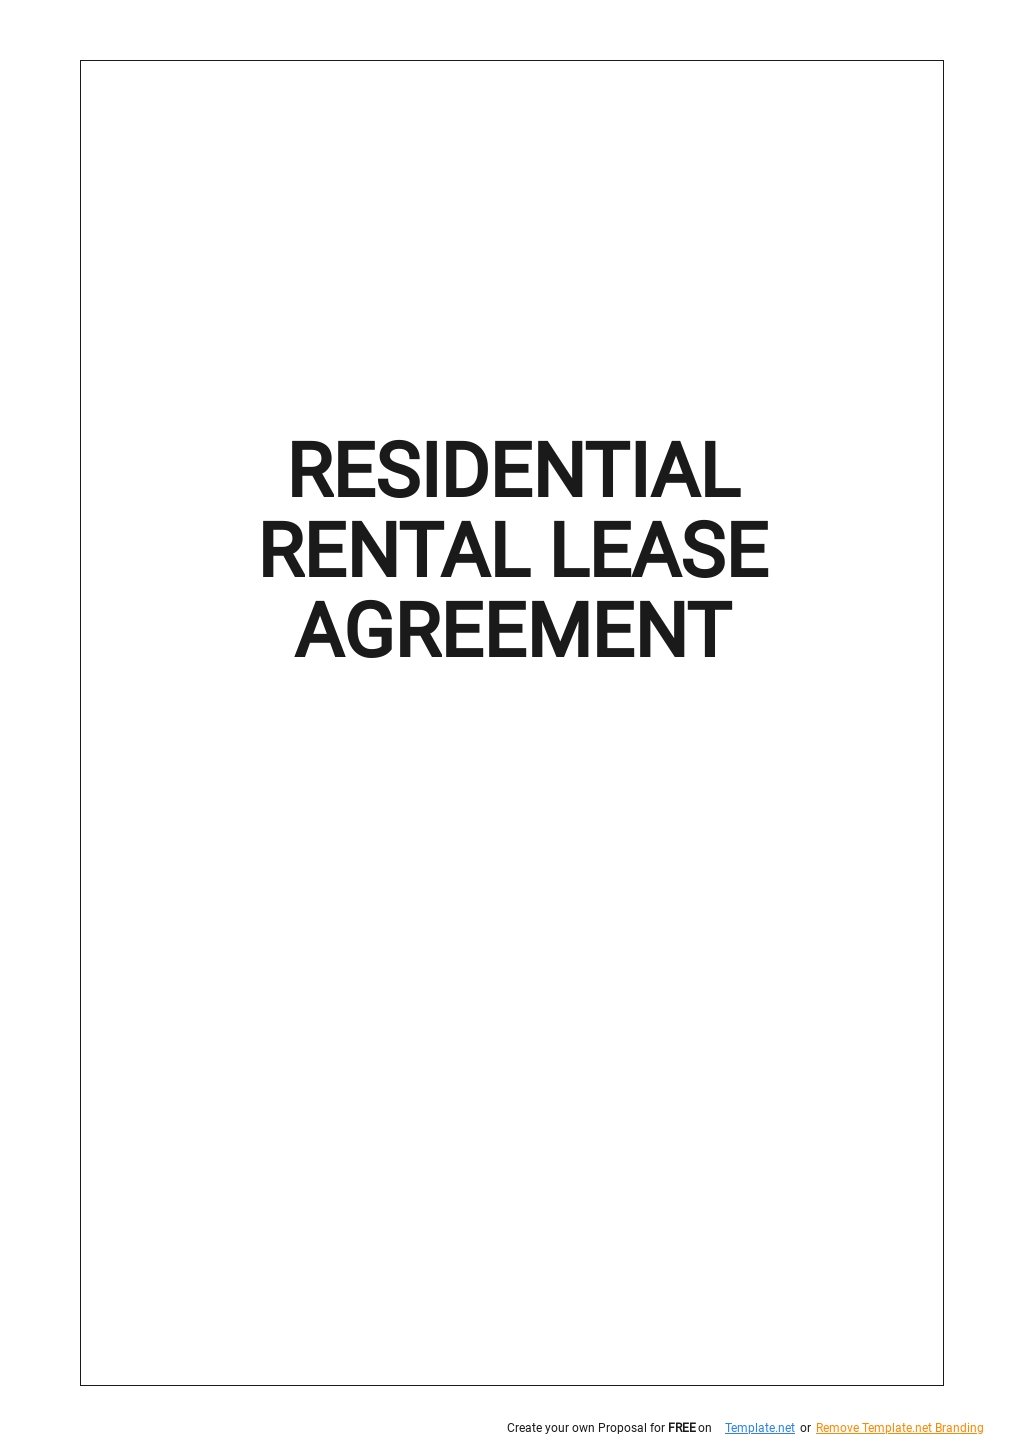 Free Residential Lease Agreement Templates, 15+ Download in Word, Pages